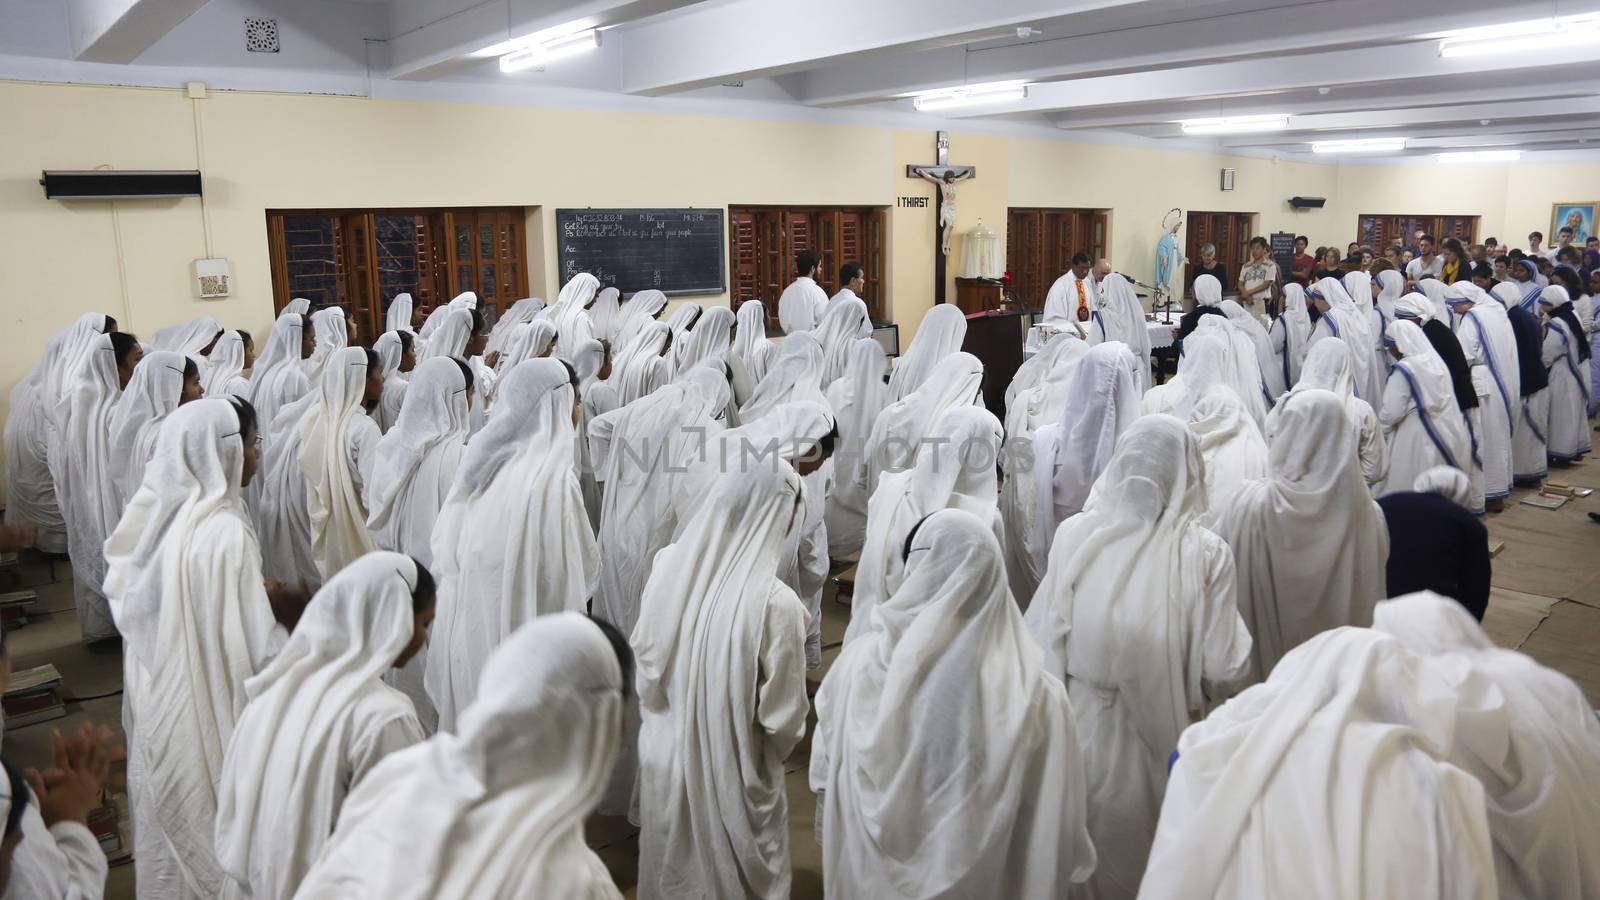 KOLKATA, INDIA - FEBRUARY 15: Sisters of The Missionaries of Charity of Mother Teresa at Mass in the chapel of the Mother House, Kolkata, India at February 15, 2014.